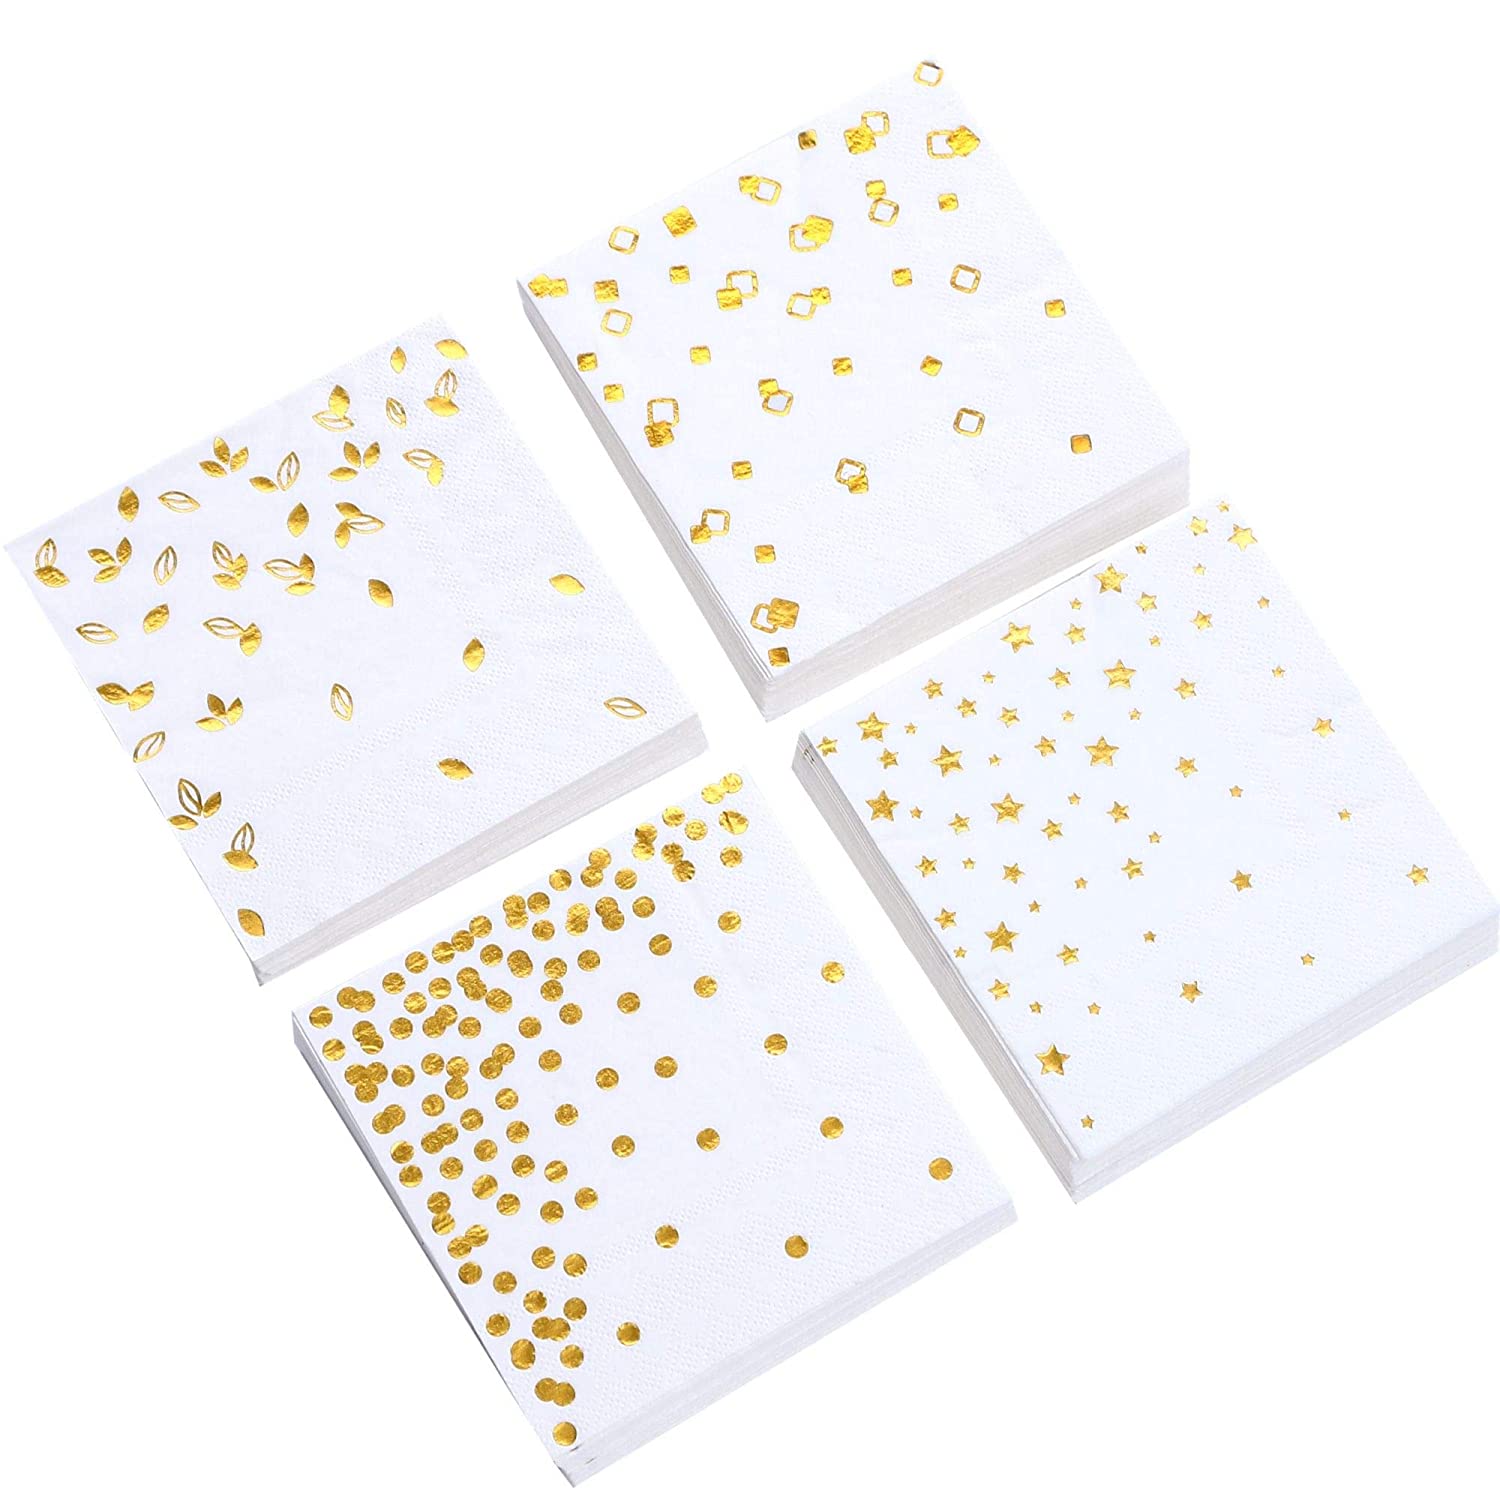 100 PK Gold Napkins - 4 Assorted Designs - 3-Ply Cocktail Napkins Folded 5 x 5 Inches Bar Napkins Disposable Party Napkins